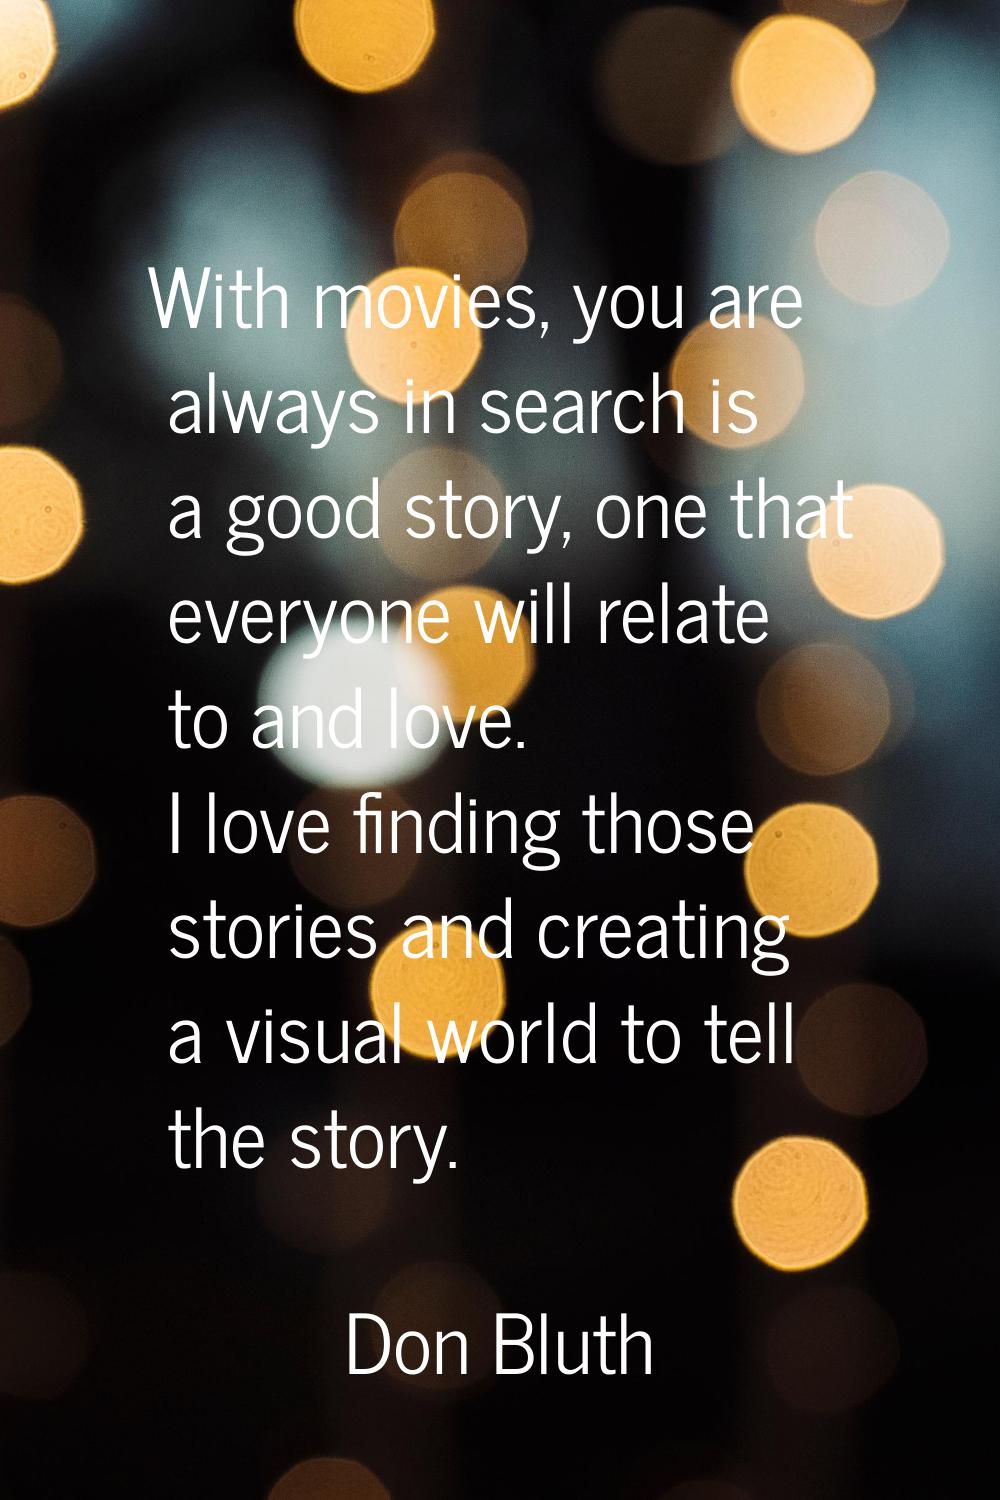 With movies, you are always in search is a good story, one that everyone will relate to and love. I